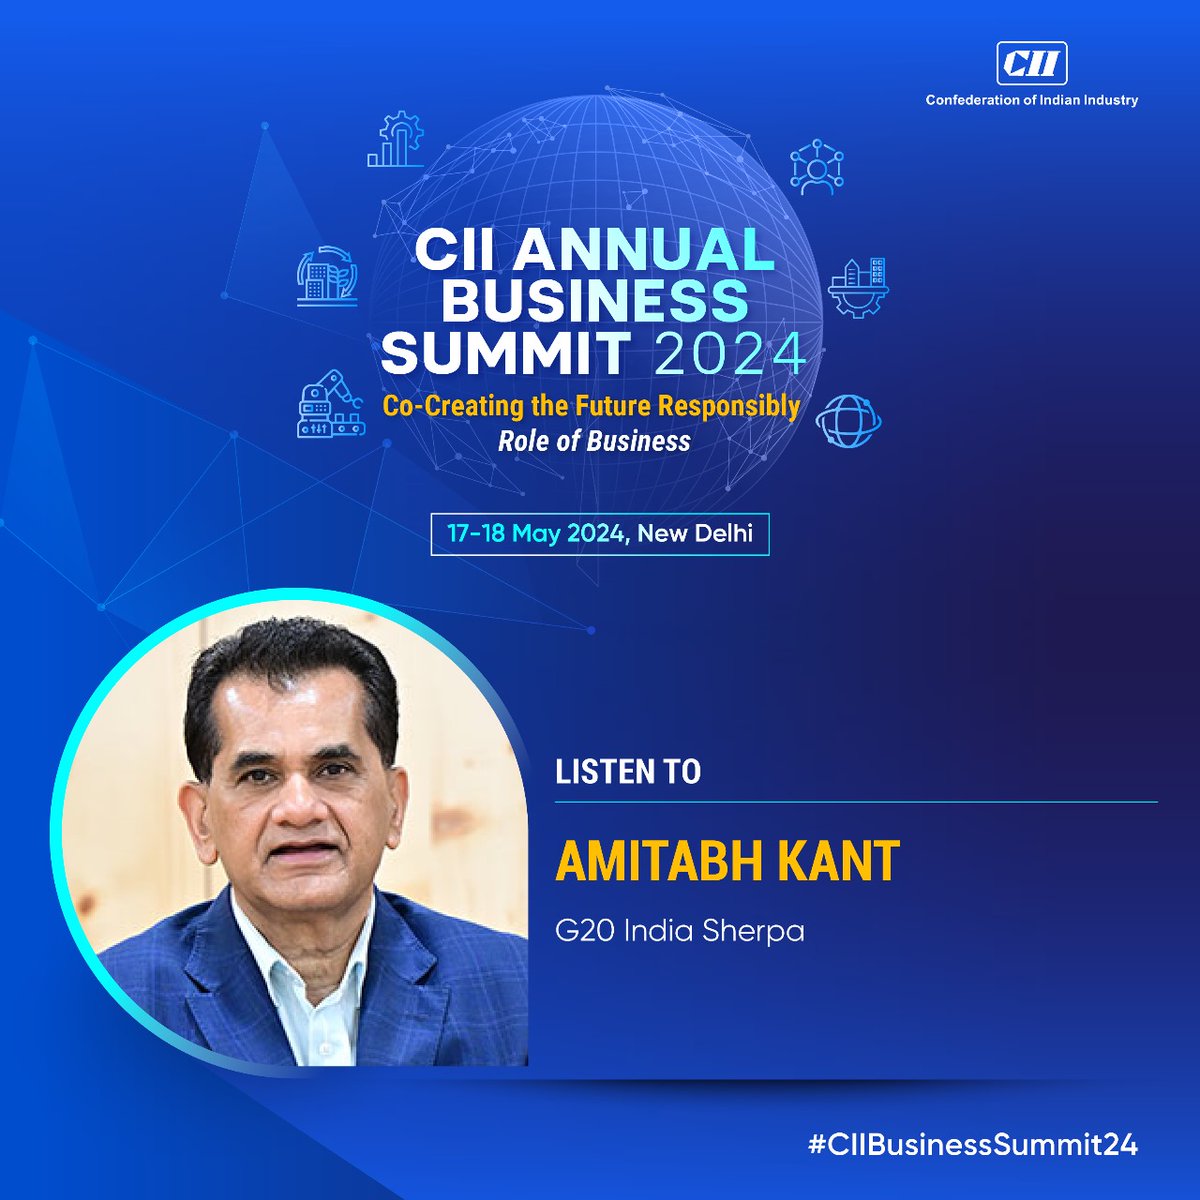 @amitabhk87, G20 India Sherpa will share insights at the CII Annual Business Summit 2024! Thought leaders and experts deliberate on the way forward for India as it sets on the path towards growth and development. Join the discussion! Date ➡17-18 May #CIIBusinessSummit24 #Growth